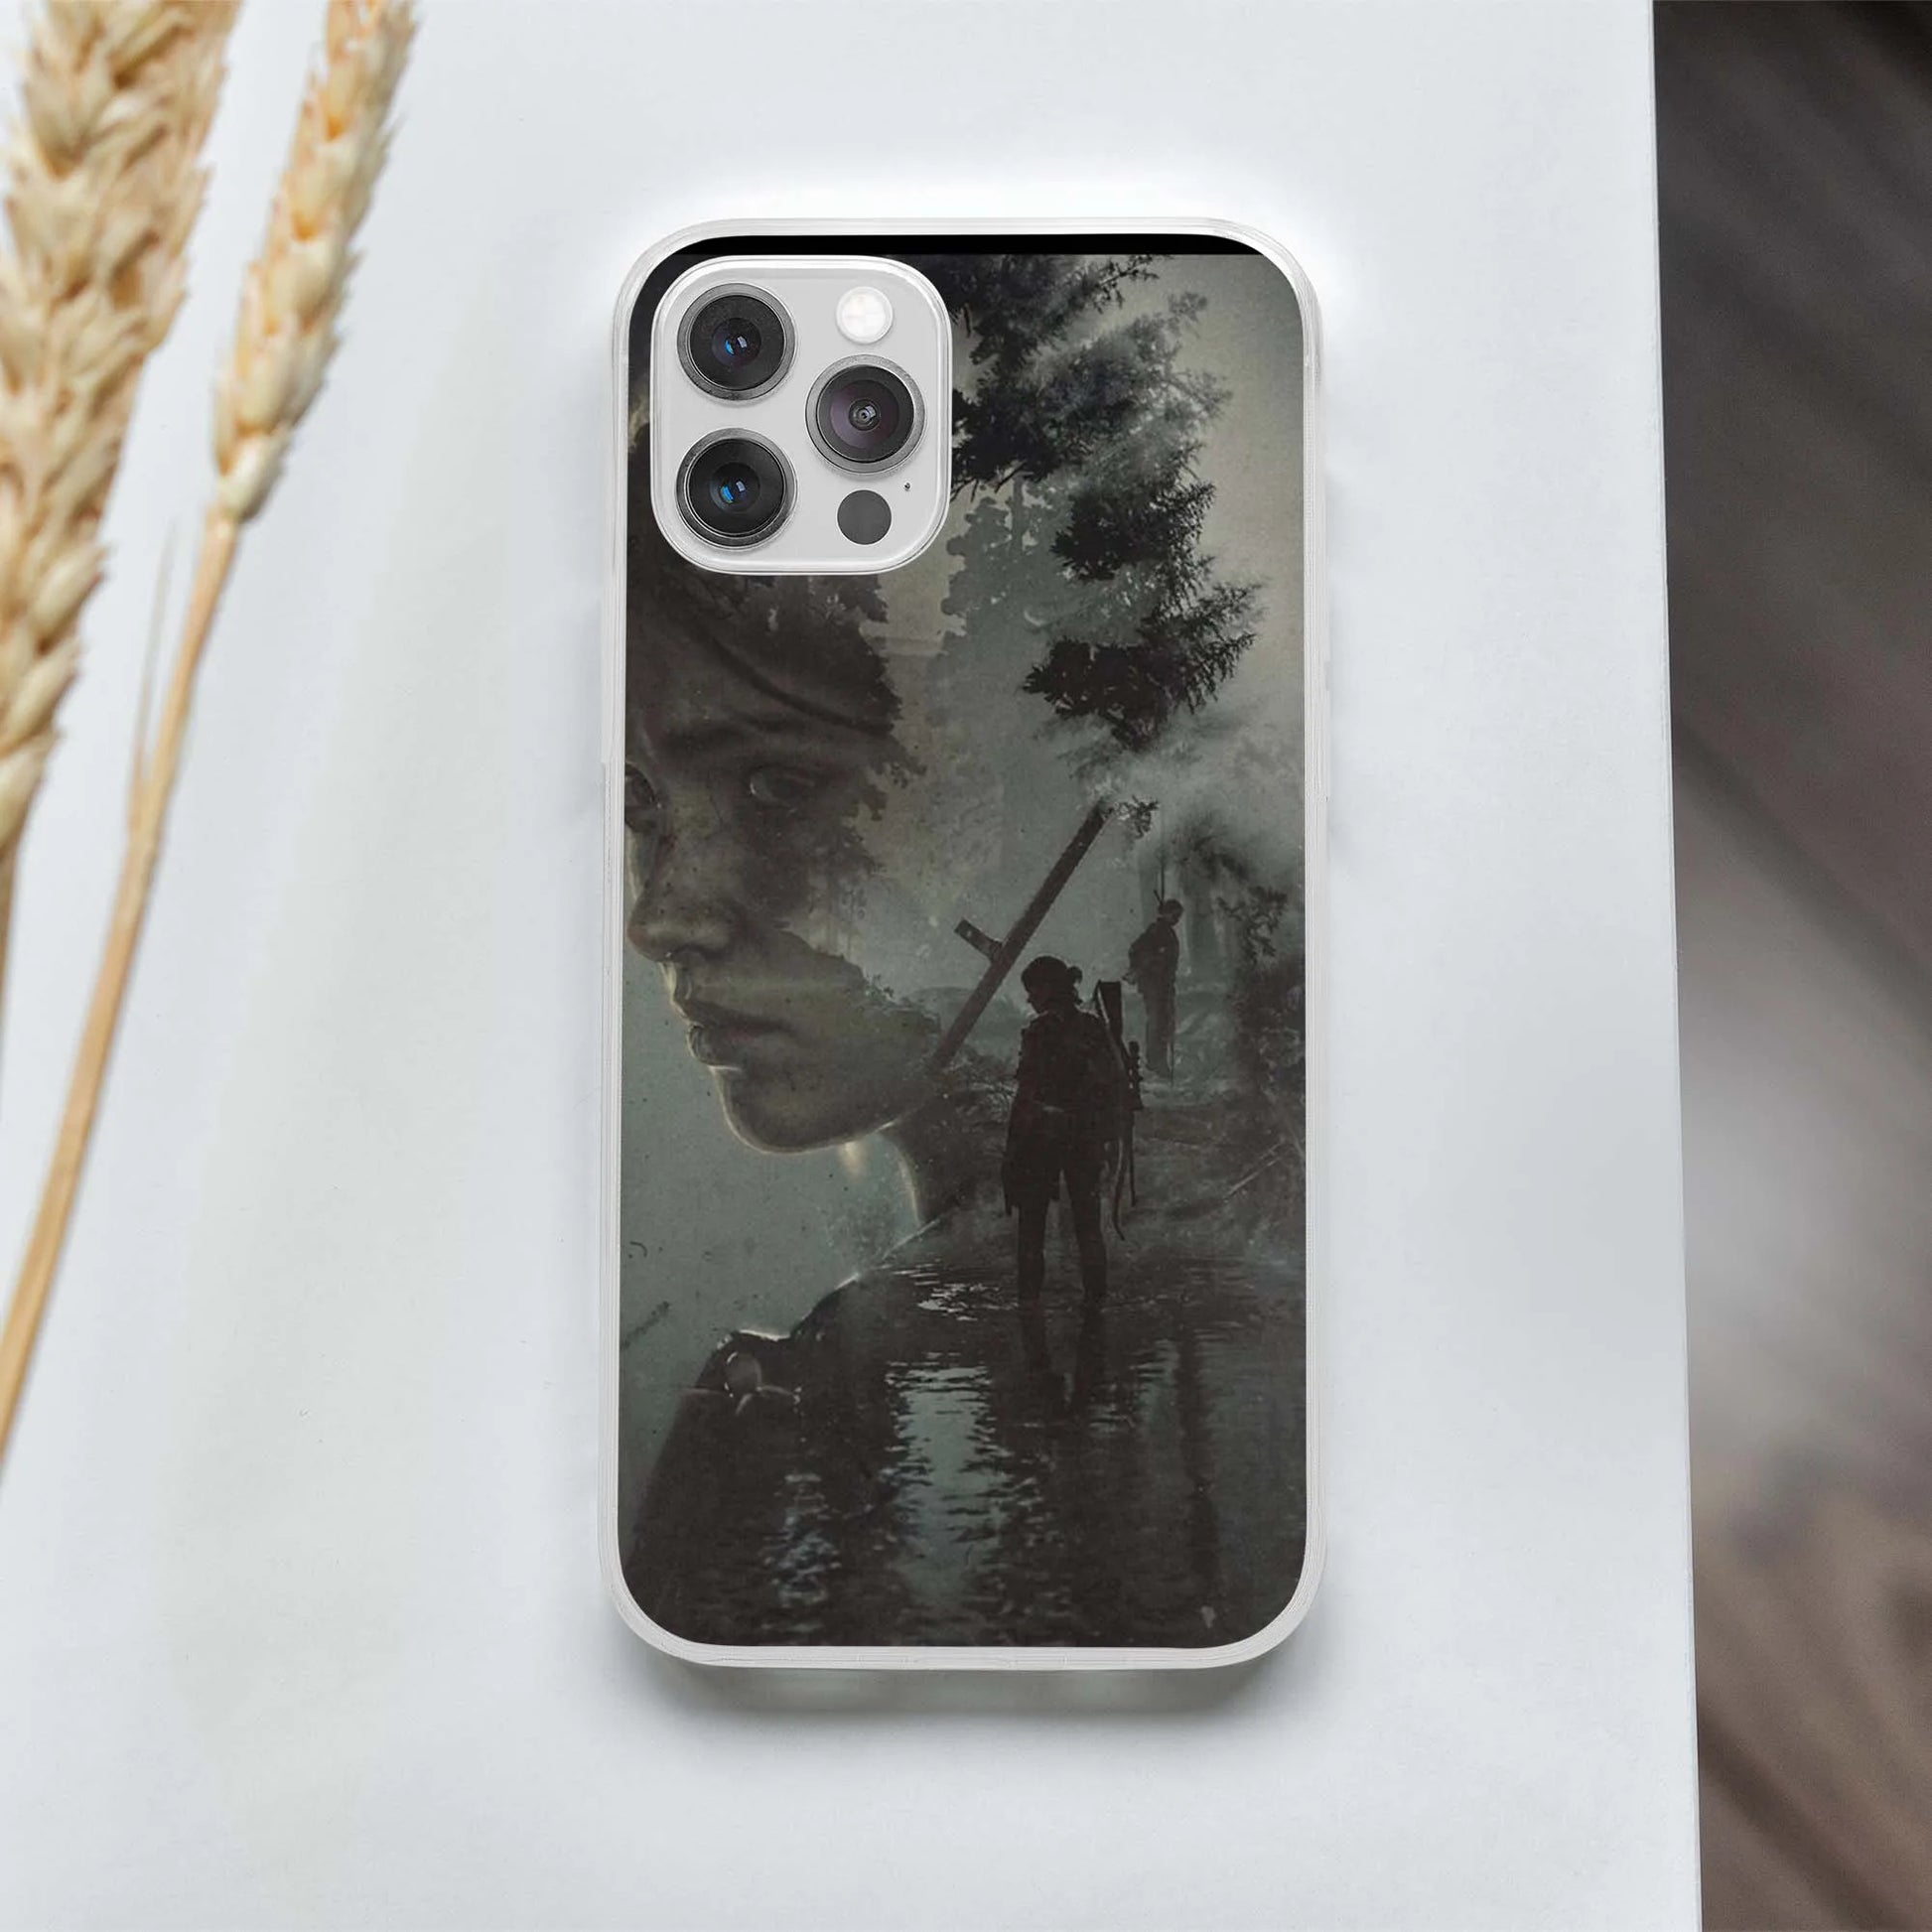 The Last Of Us Ellie Soft Phone Case for iPhone - 6 / iPhone 7 8 Available at 2Fast2See.co